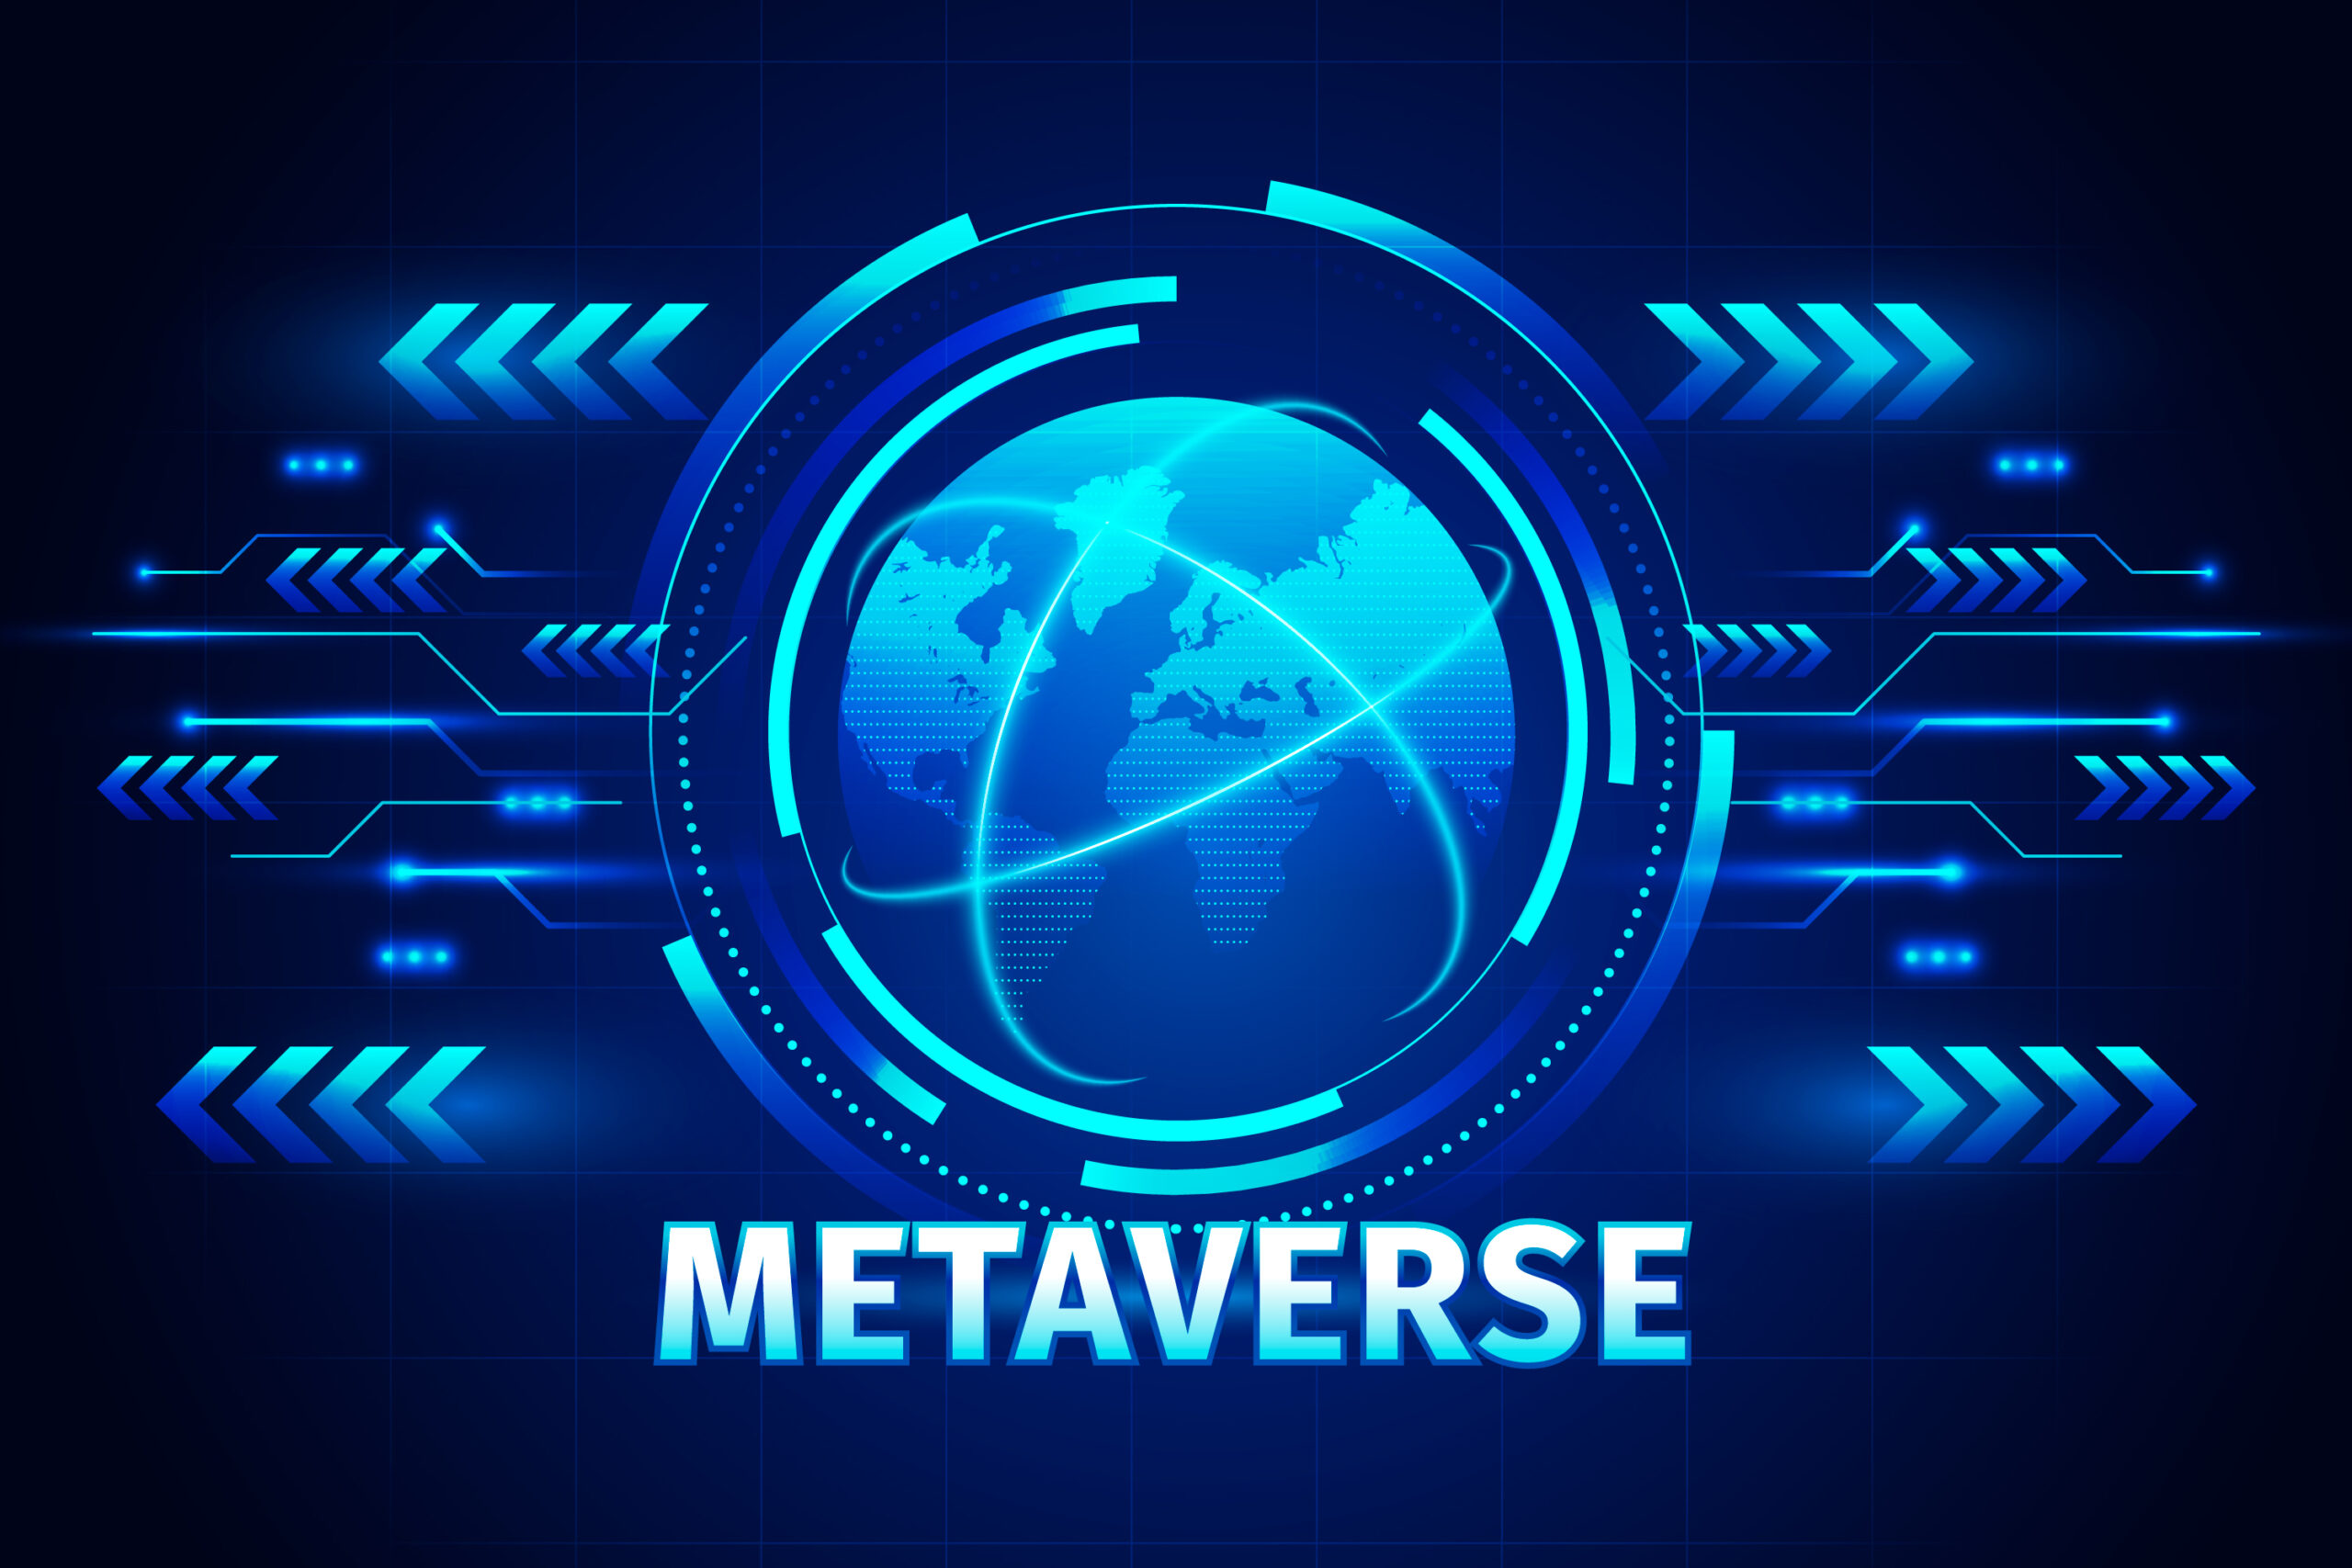 Know all about the Metaverseuse cases and their benefits.